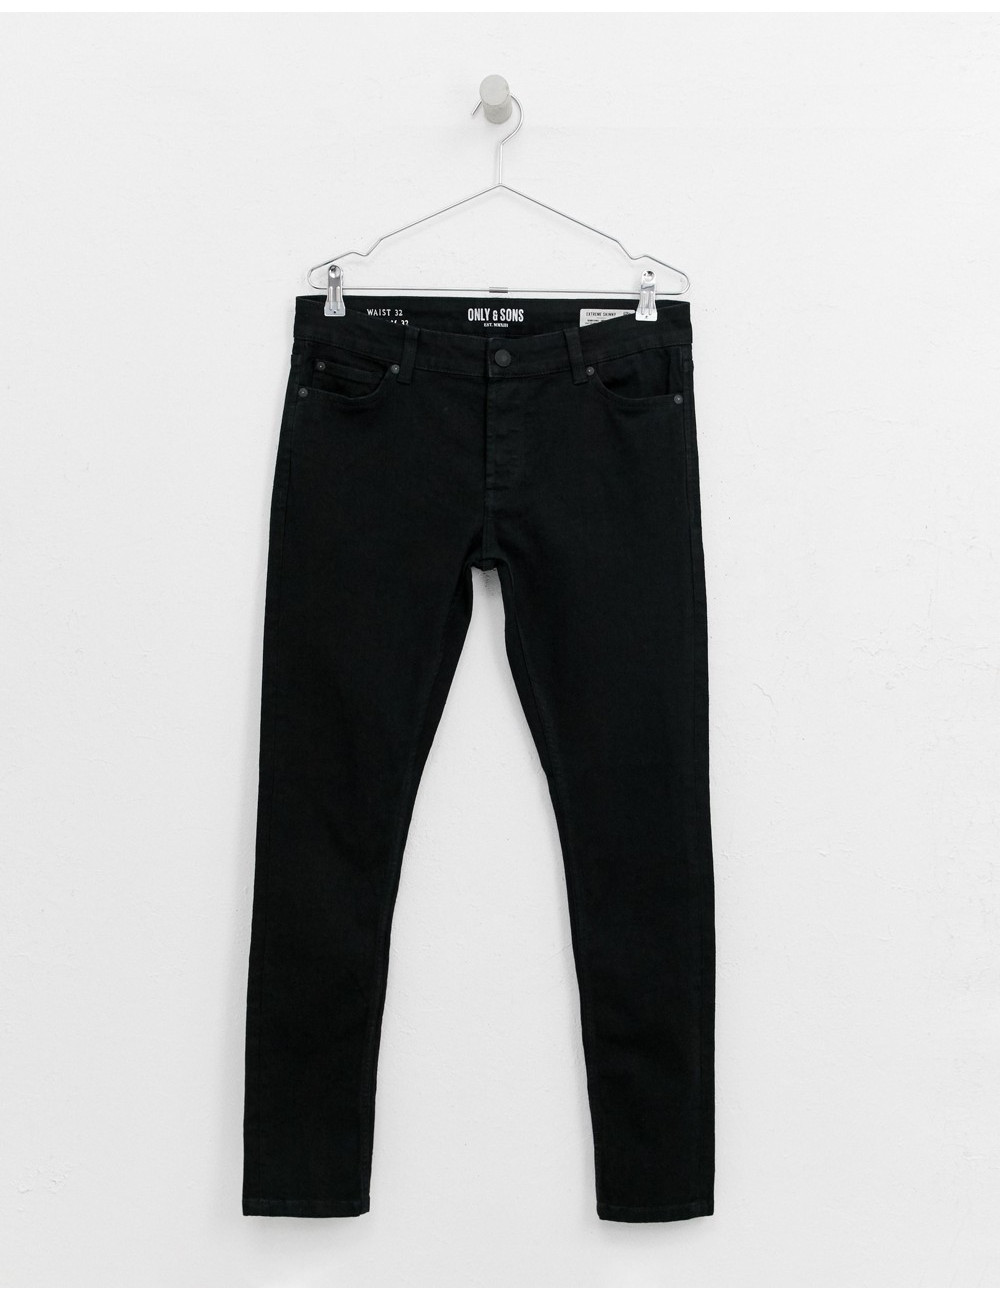 Only & Sons super skinny...